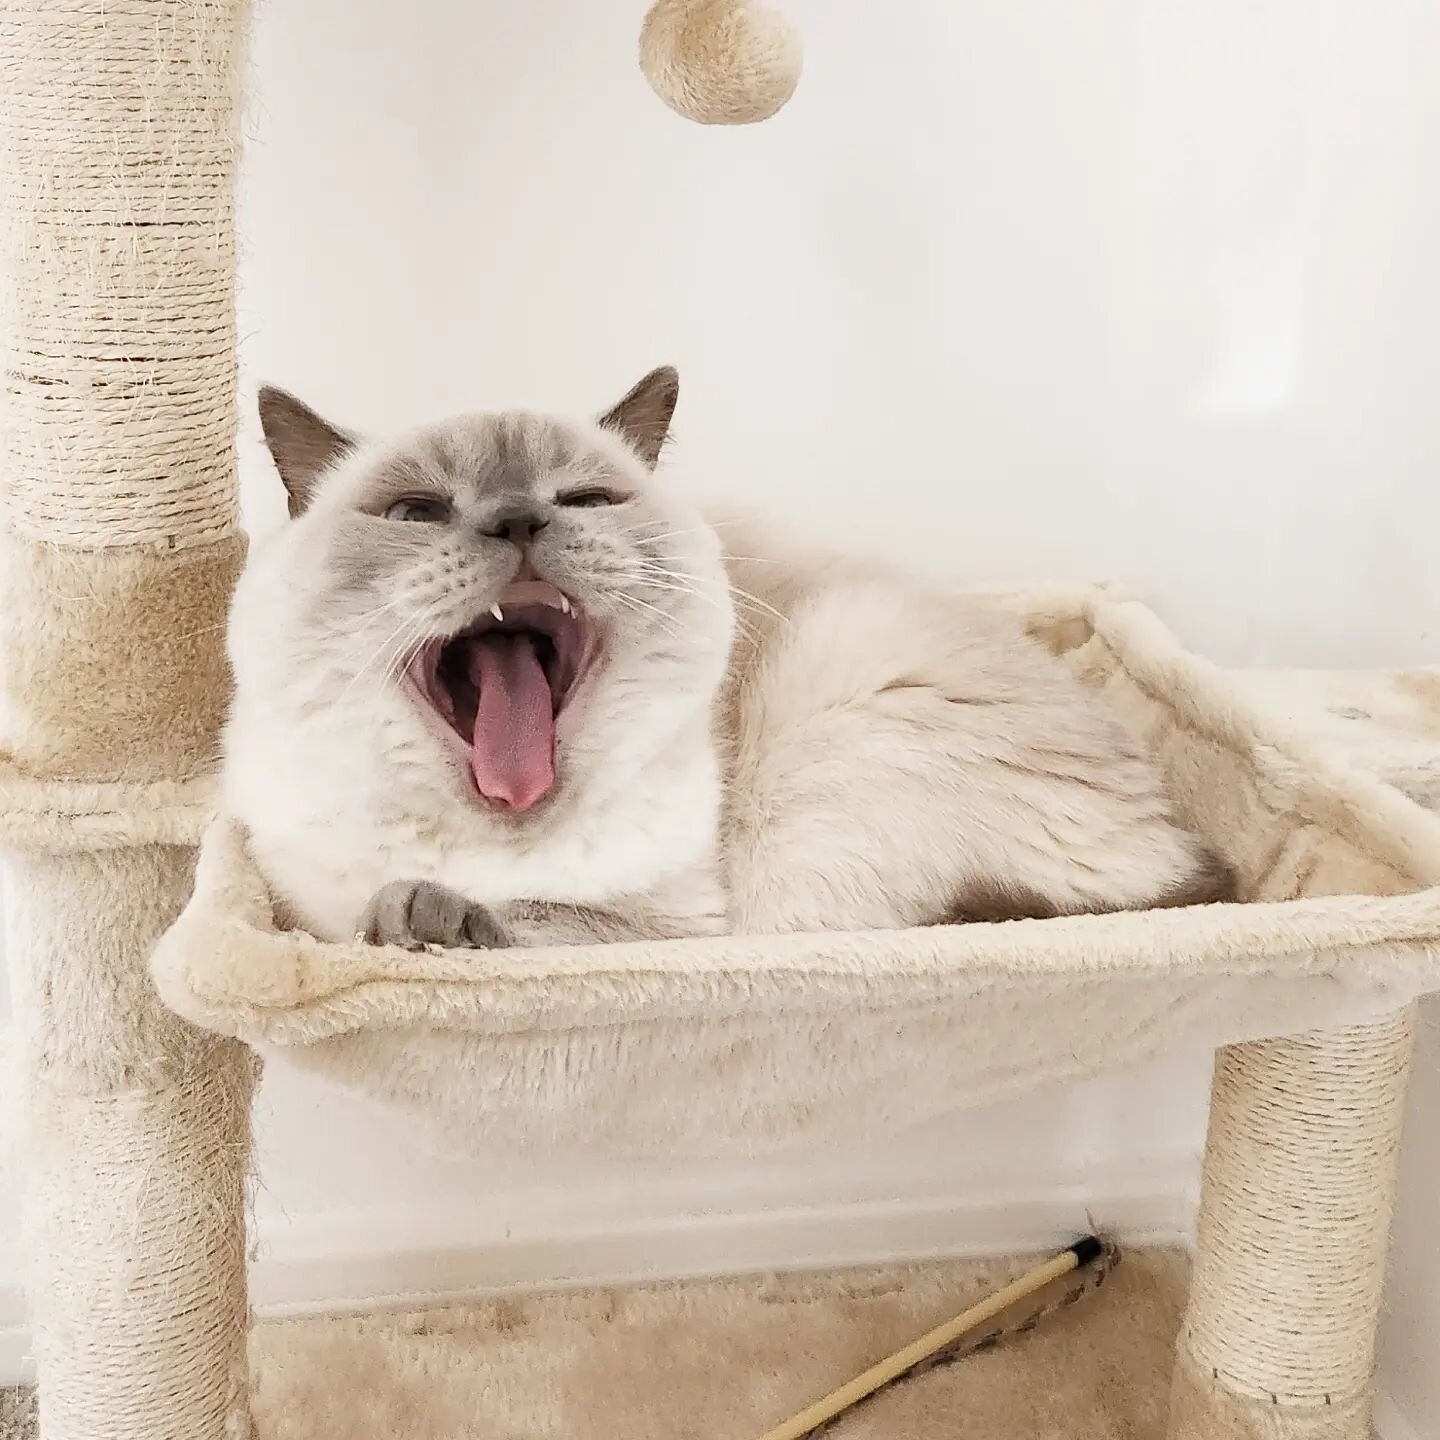 Marshall has a busy weekend planned of snoozing, yawning, napping and dozing.

#catsittingmanchester
&middot;
&middot;
&middot;
#cat_of_instagram #catsofinstagram #meow #catlover #catstagram #catsagram #instacat #kitty #catloversclub #cats #cats_of_i